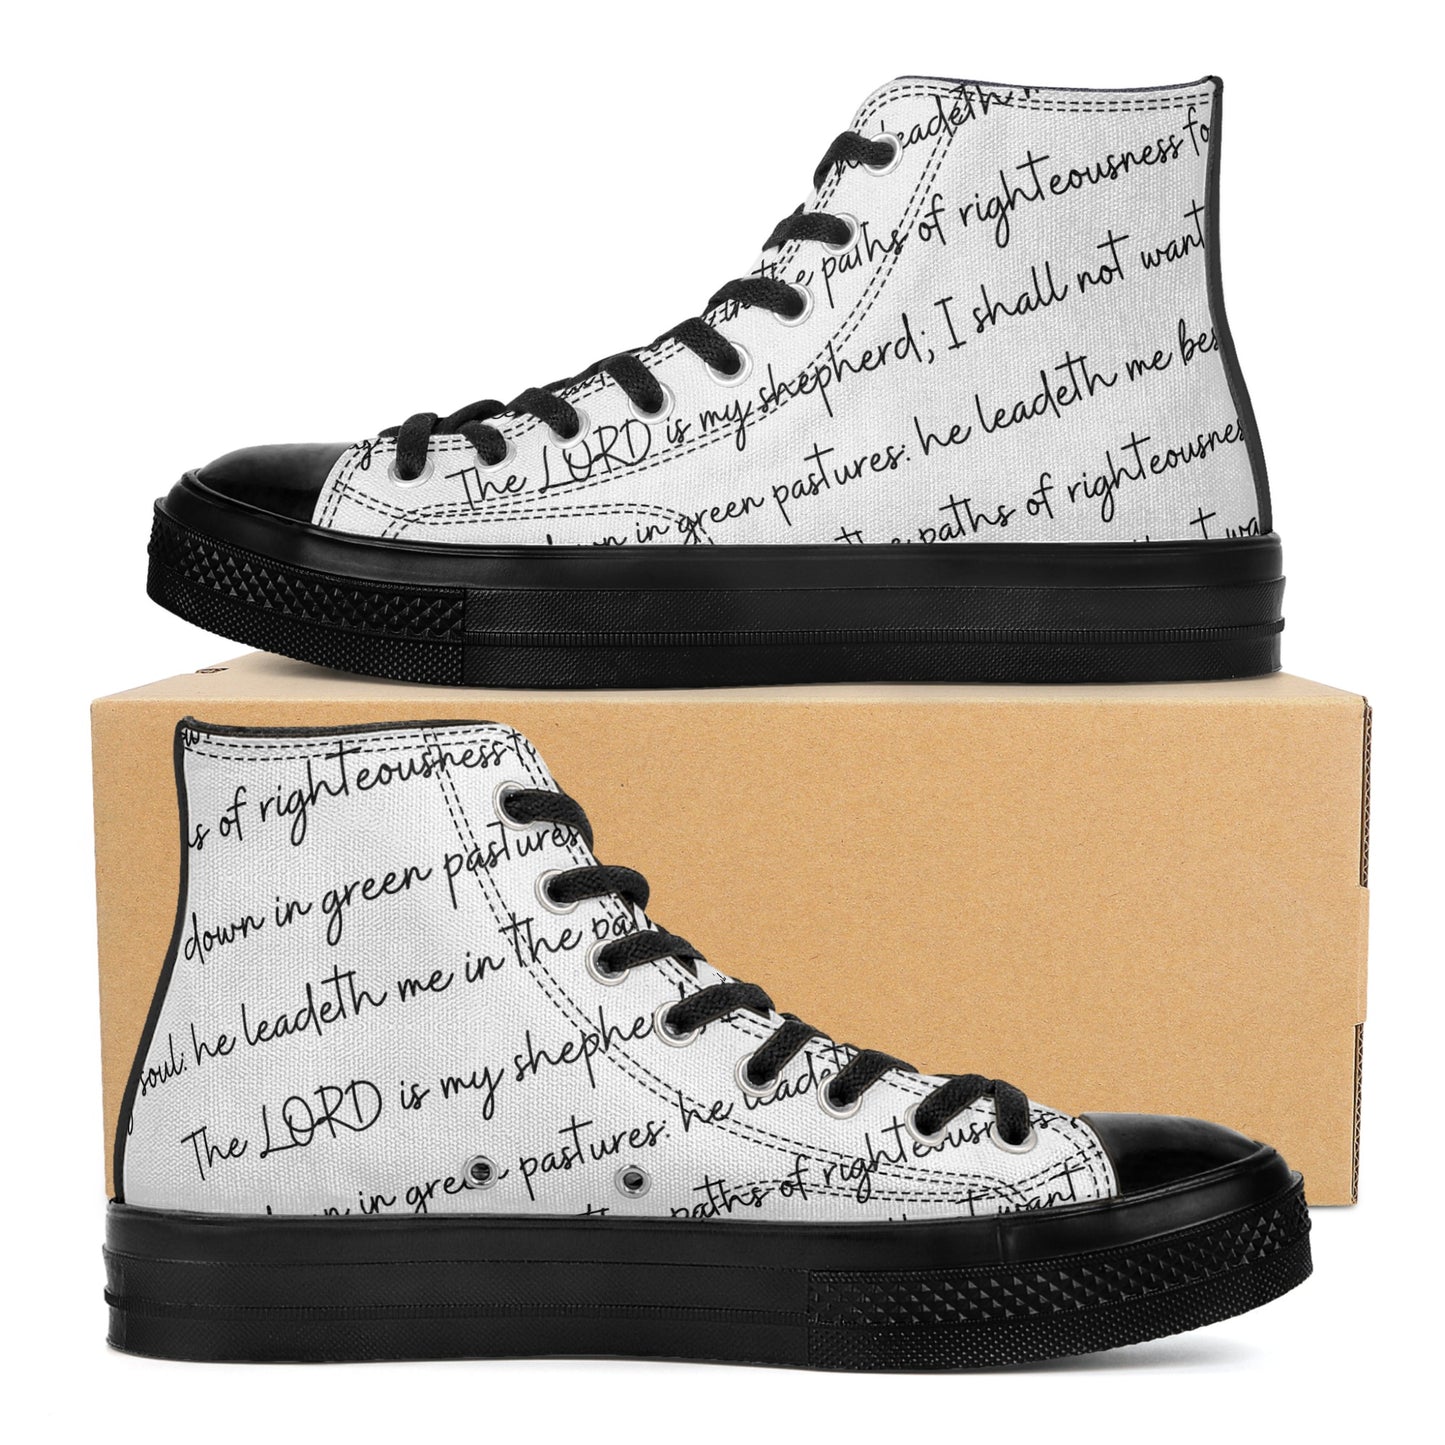 PSALM 23 Mens Classic Black High Top Canvas Shoes